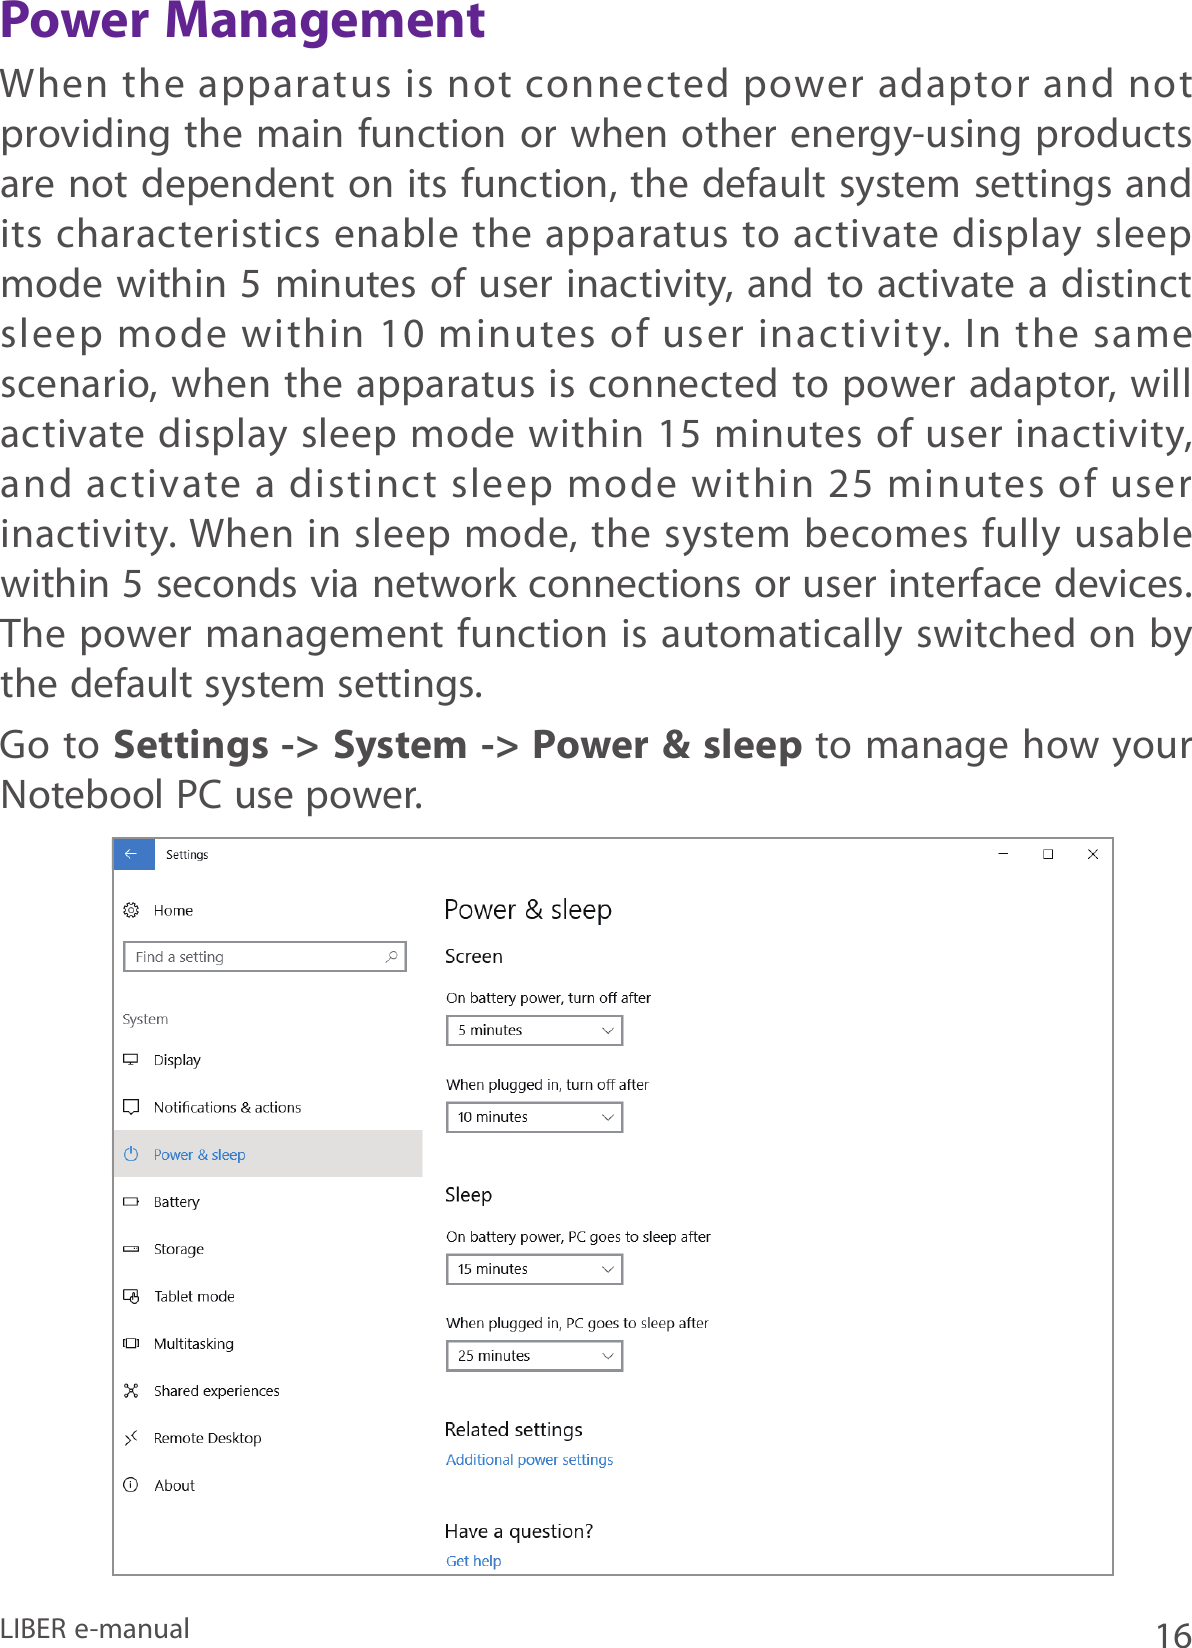 16LIBER e-manualPower ManagementWhen the  apparatus is not  connected power adaptor and not providing the main function or when other energy-using products are not dependent on its function, the default system settings and its characteristics enable the apparatus to activate display sleep mode within 5 minutes of user inactivity, and to activate a distinct sleep  mode  within  10 minutes  of user  inactivity.  In  the  same scenario, when the apparatus is connected to power adaptor, will activate display sleep mode within 15  minutes of user inactivity, and  activate a  distinct  sleep  mode within  25 minutes  of user inactivity. When in sleep mode, the system becomes fully usable within 5 seconds via network connections or user interface devices. The power management function is automatically switched on by the default system settings.Go to Settings -&gt; System -&gt; Power &amp; sleep to manage how your Notebool PC use power.